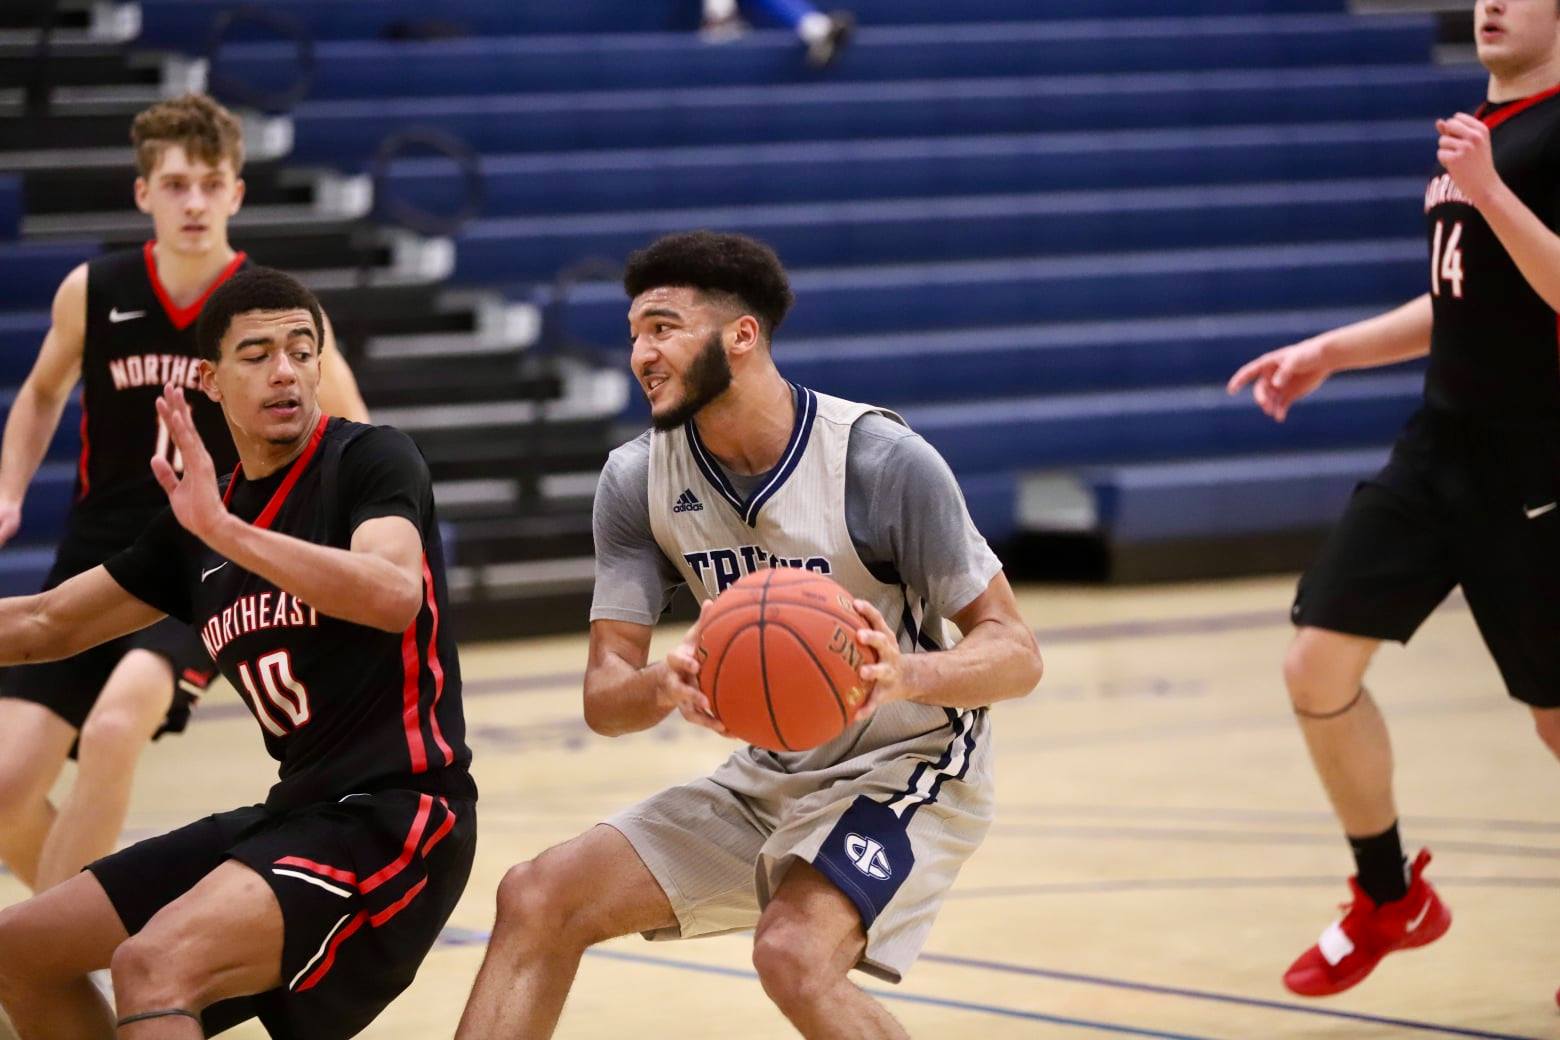 Iowa Central comes up short on road